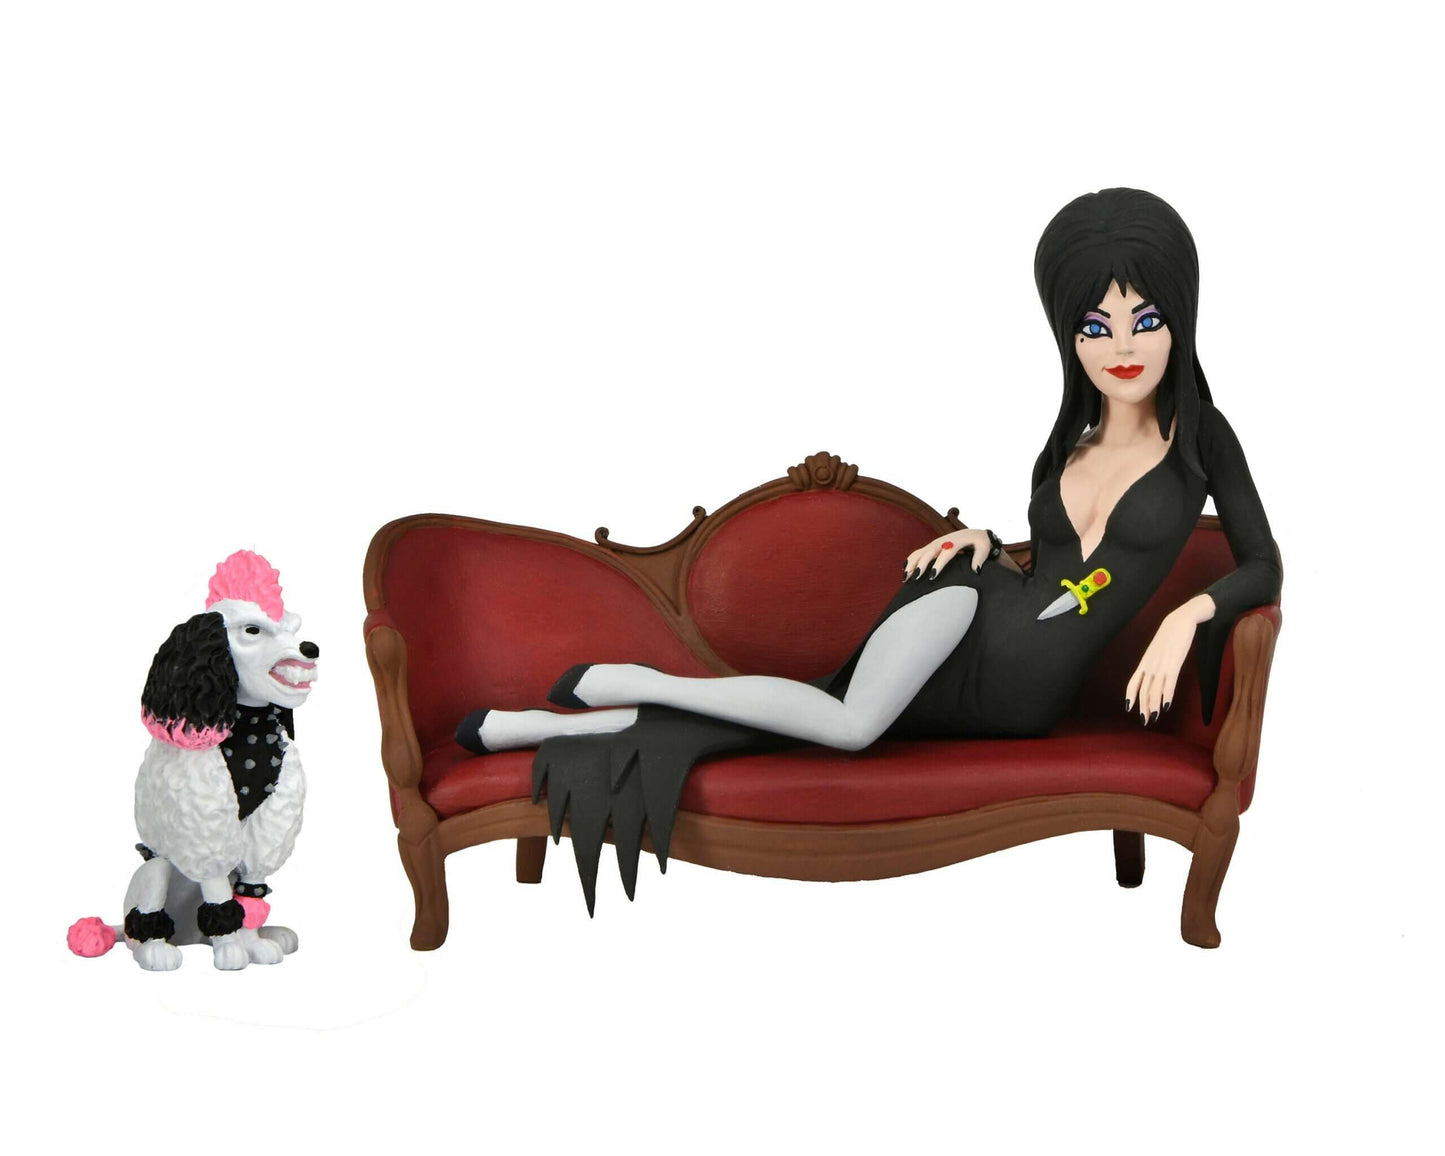 Elvira on Couch 6” Scale Action Figure – Toony Terrors Boxed Set